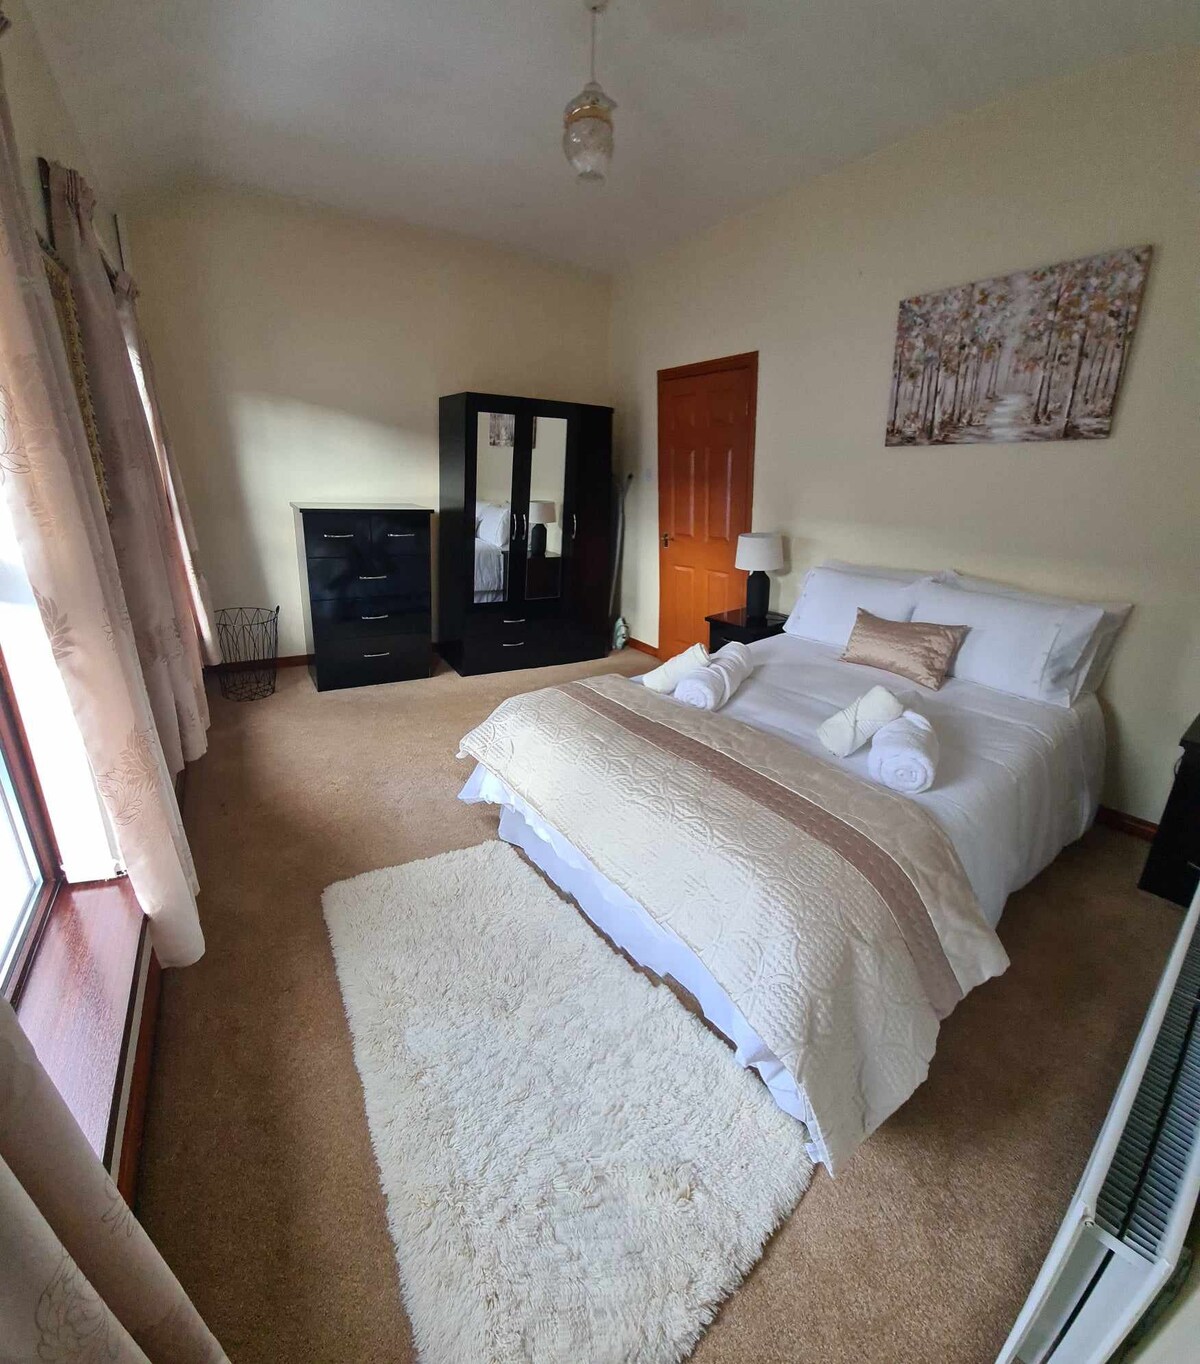 Entire Guest House in Derry
3 Bedrooms
sleeps 5